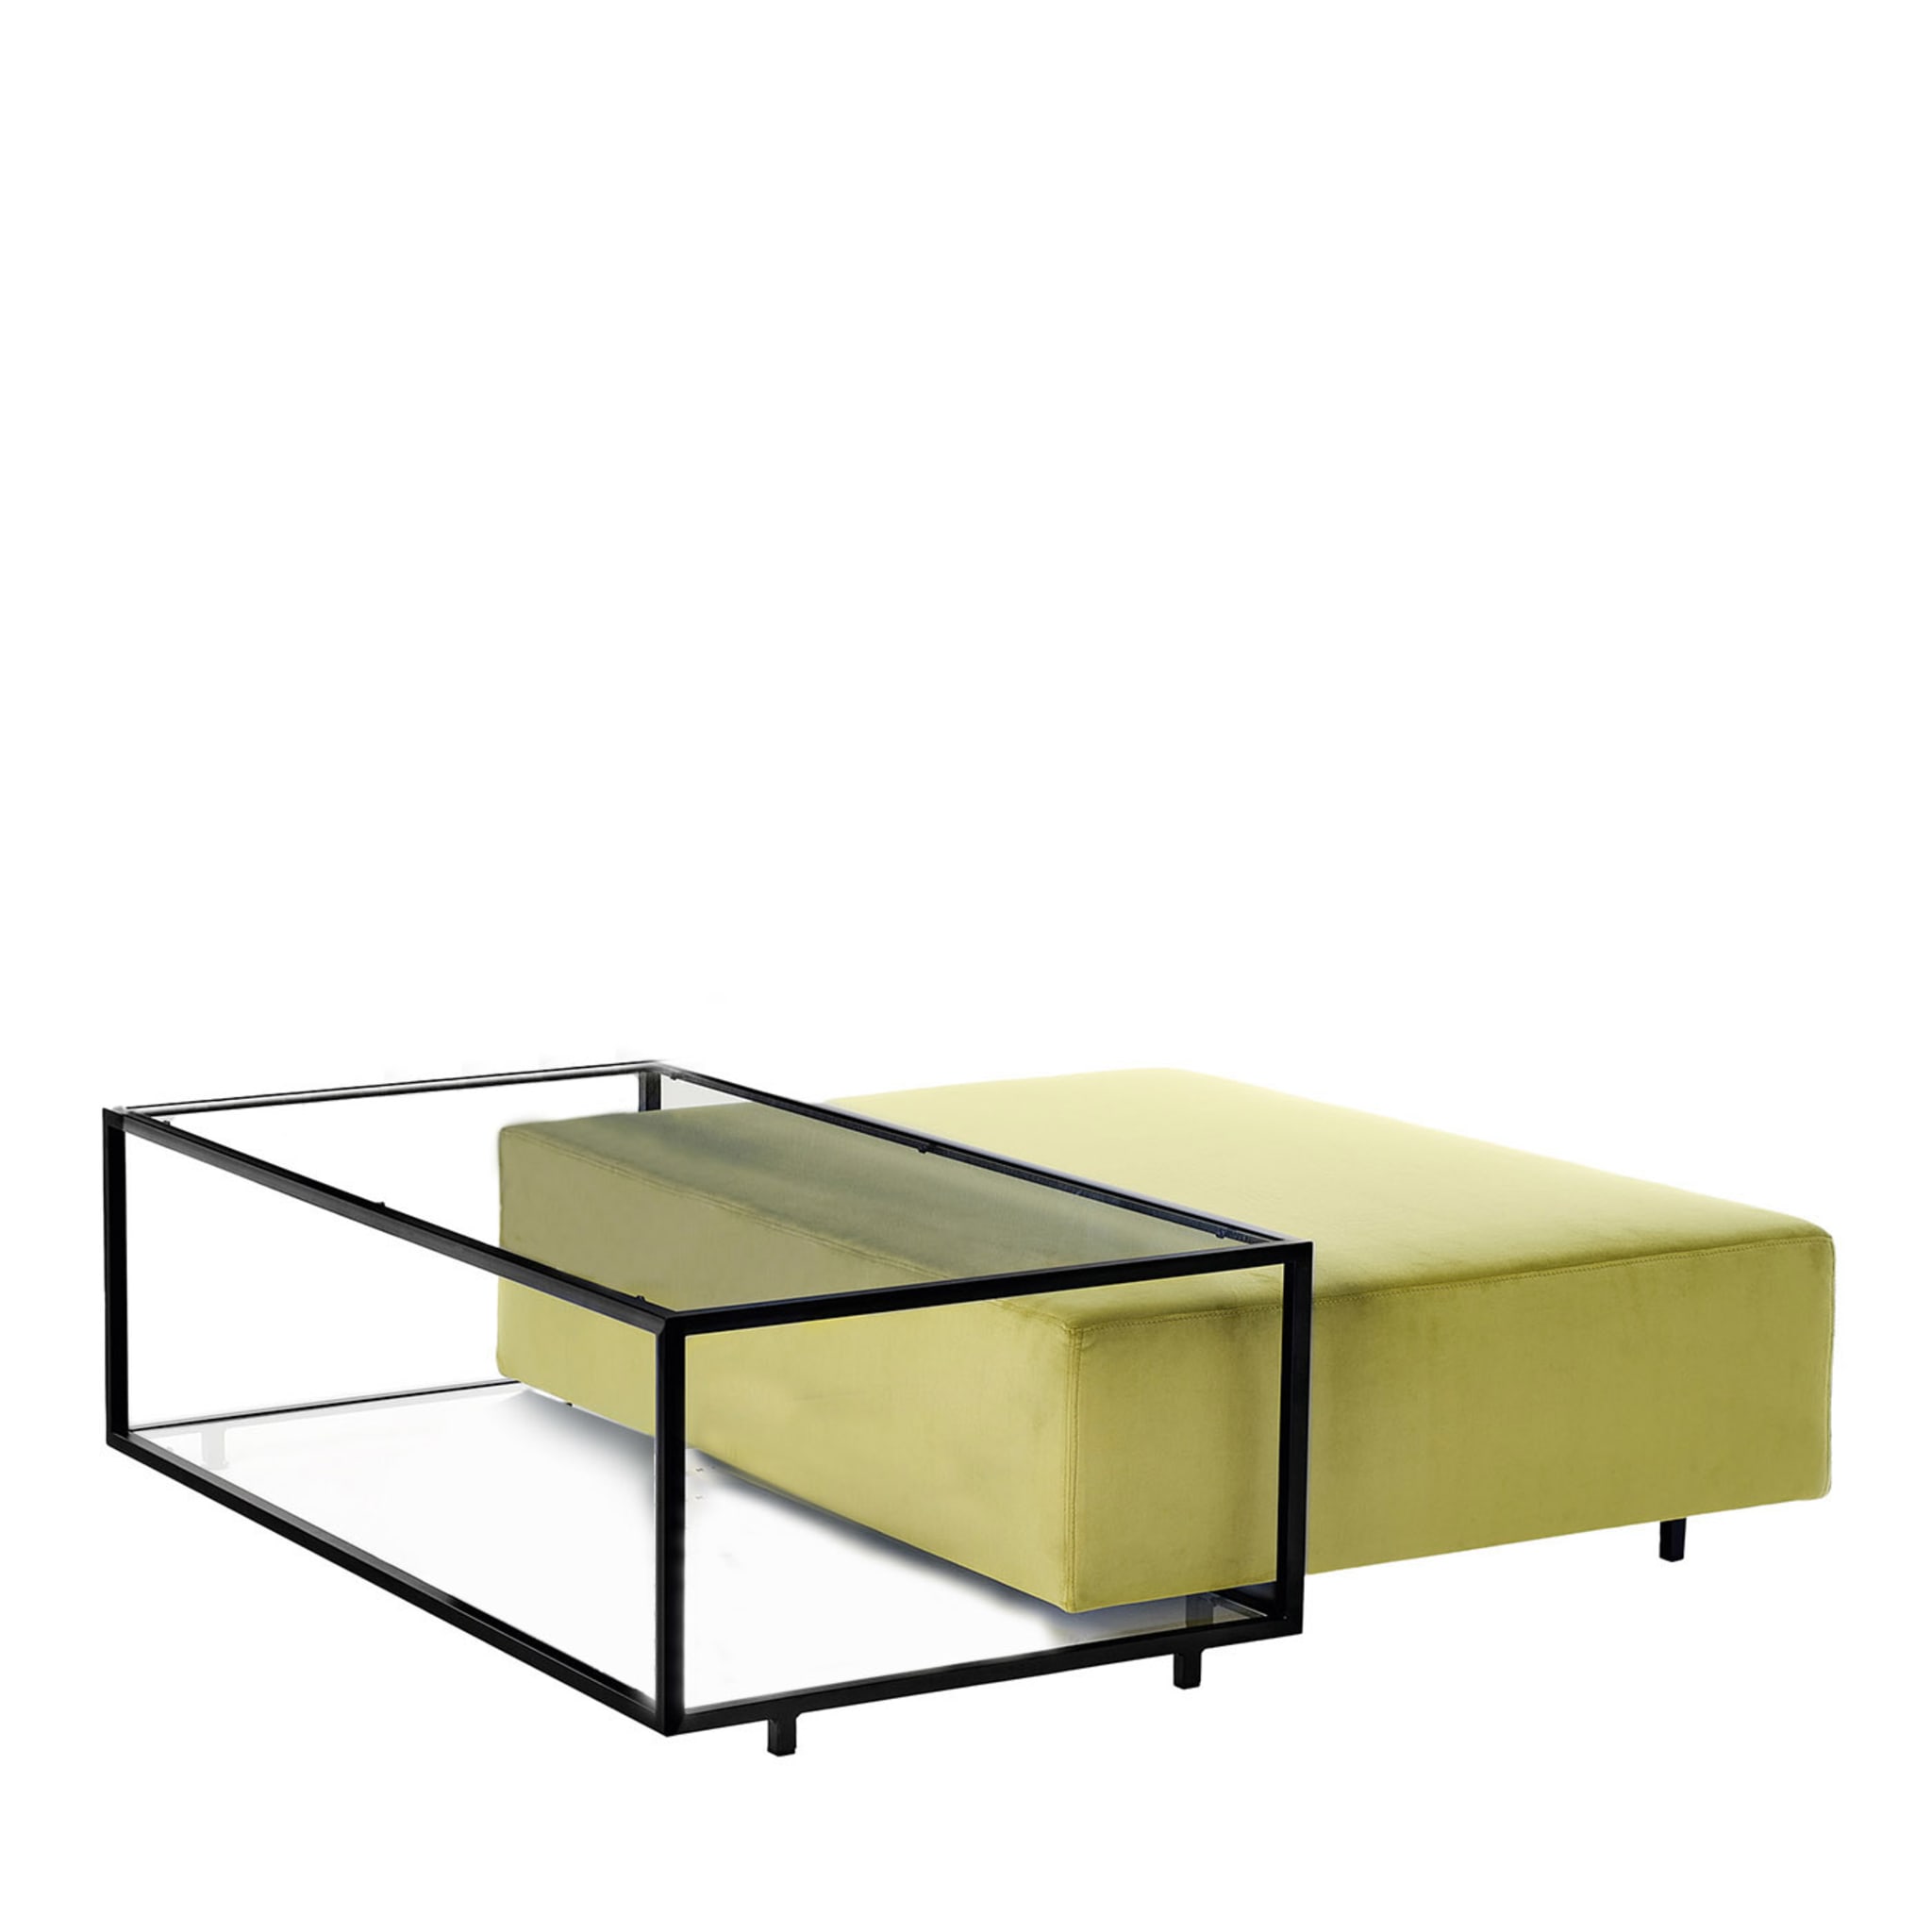 Zoom Green Pouf + Black Coffee Table by Uto Balmoral - Main view